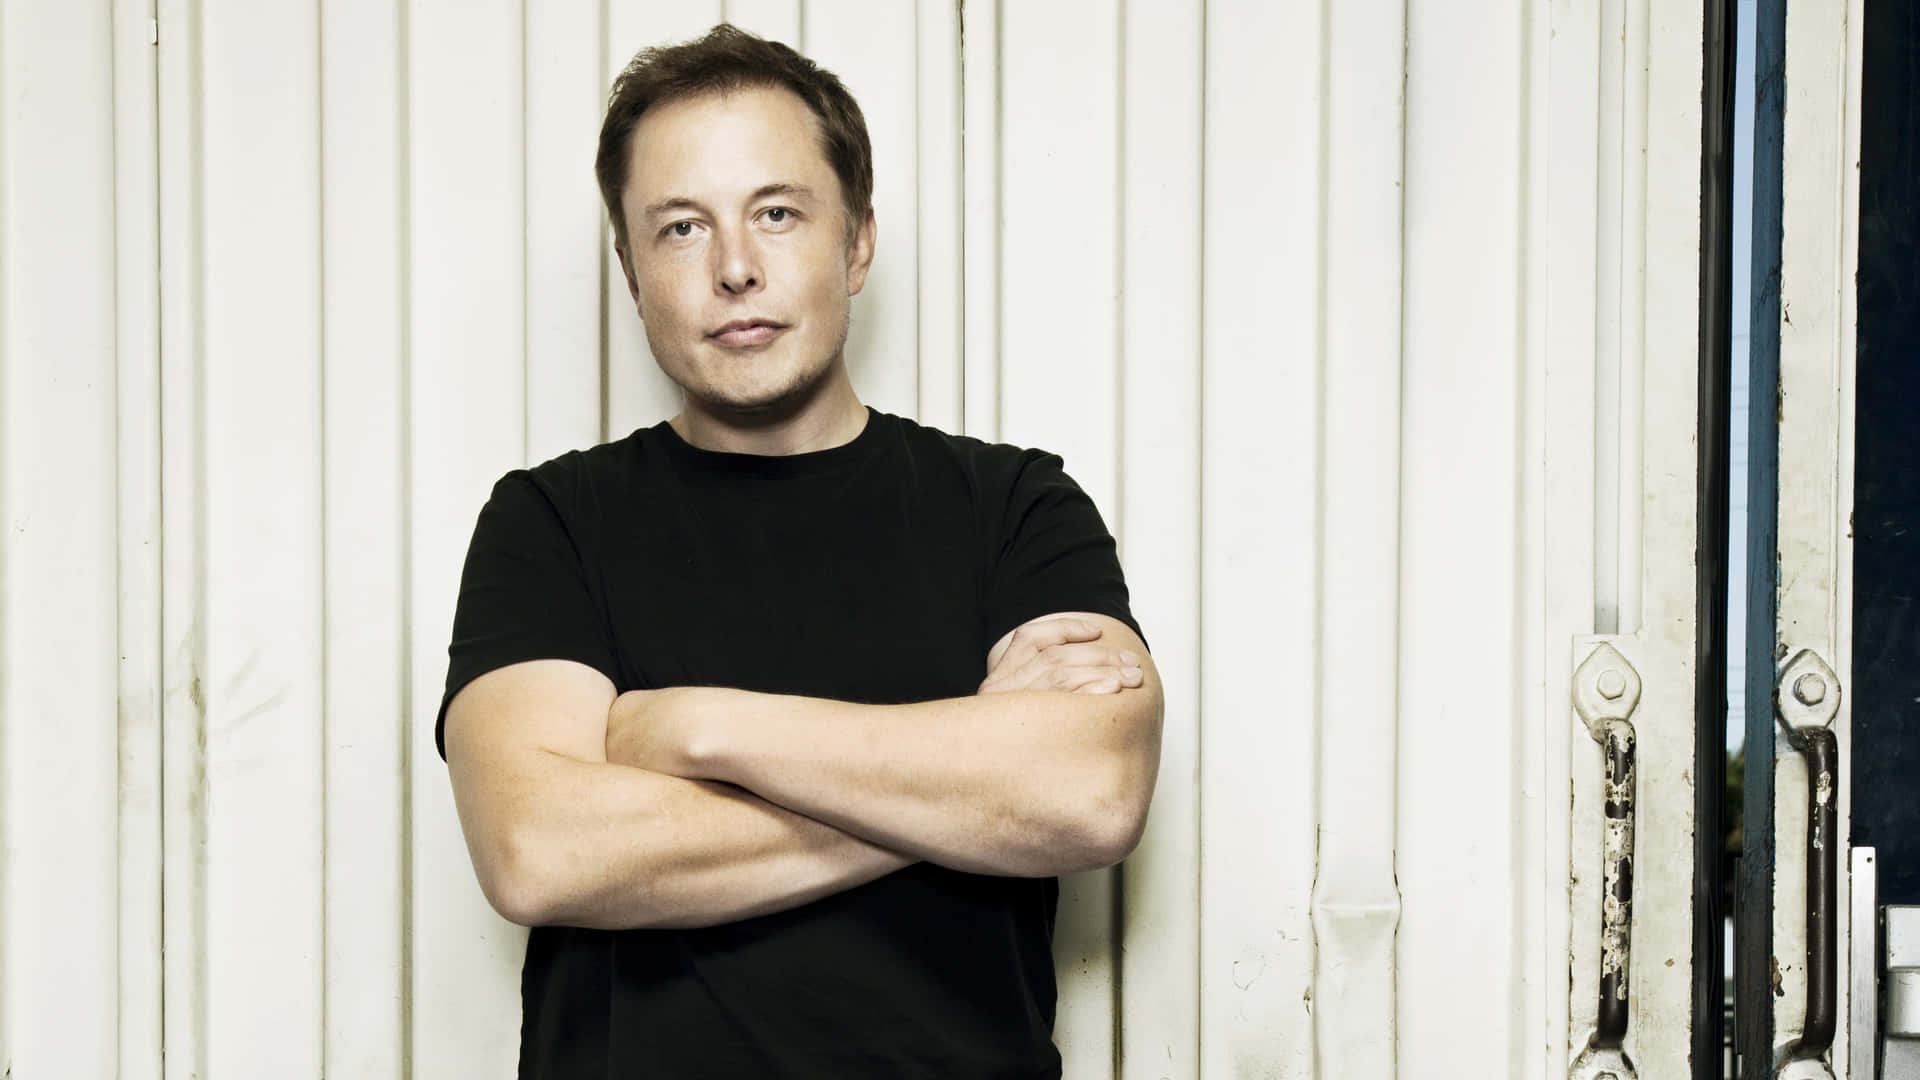 “Dream Boldly and Take Action” - Elon Musk